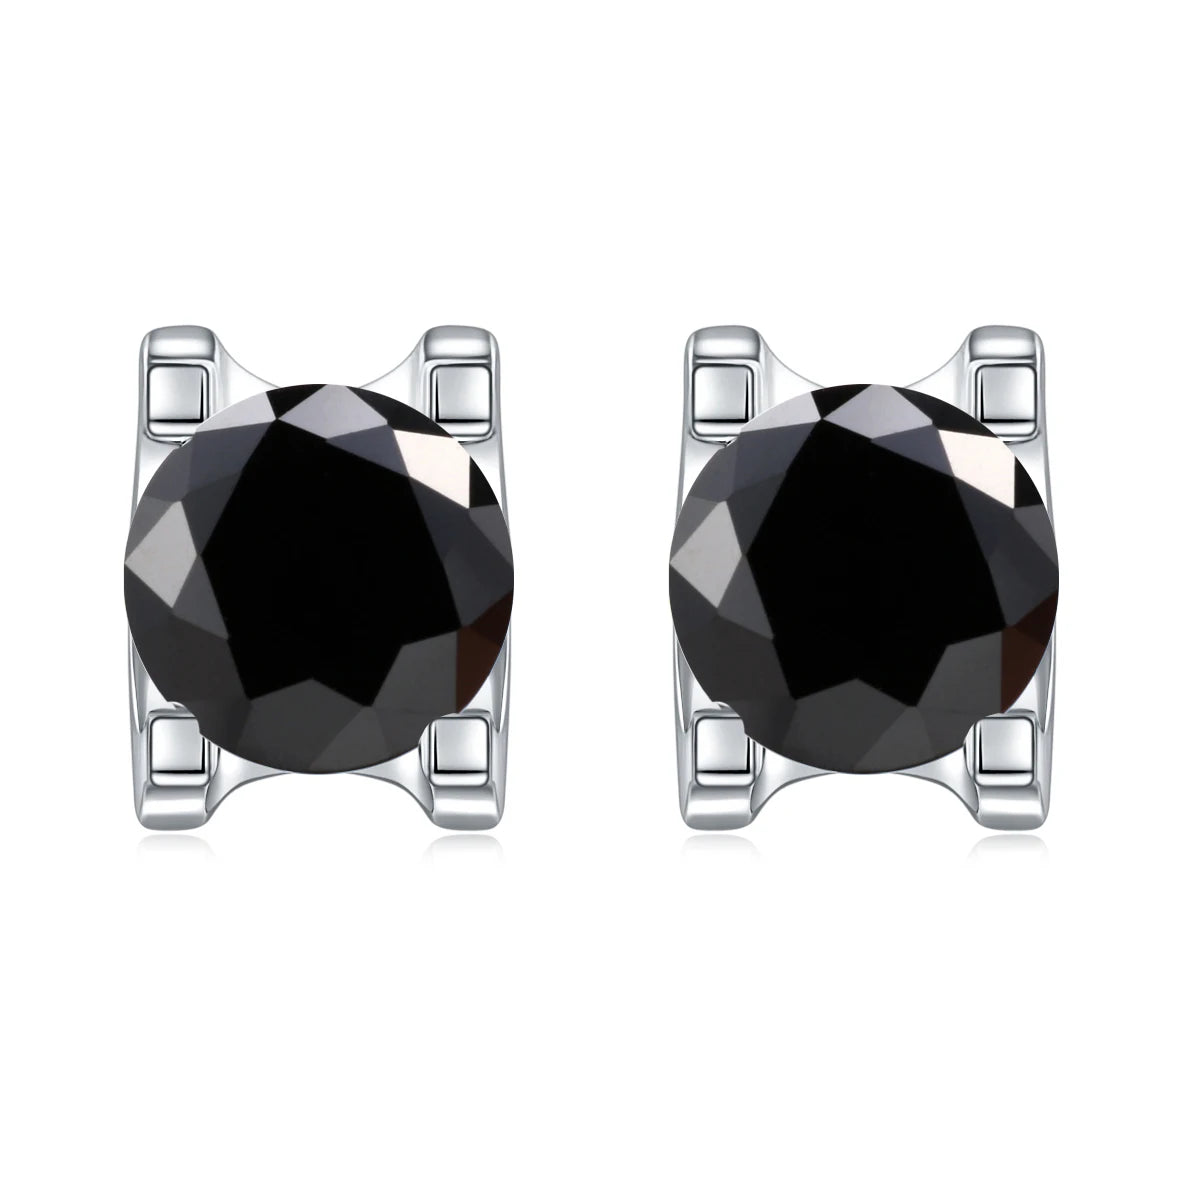 GEM'S BALLET Moissanite Earrings 0.5ct 5mm Round Moissanite Twisted Prong Stud Earrings in 925 Sterling Silver Gift For Her Black 925 Sterling Silver CHINA